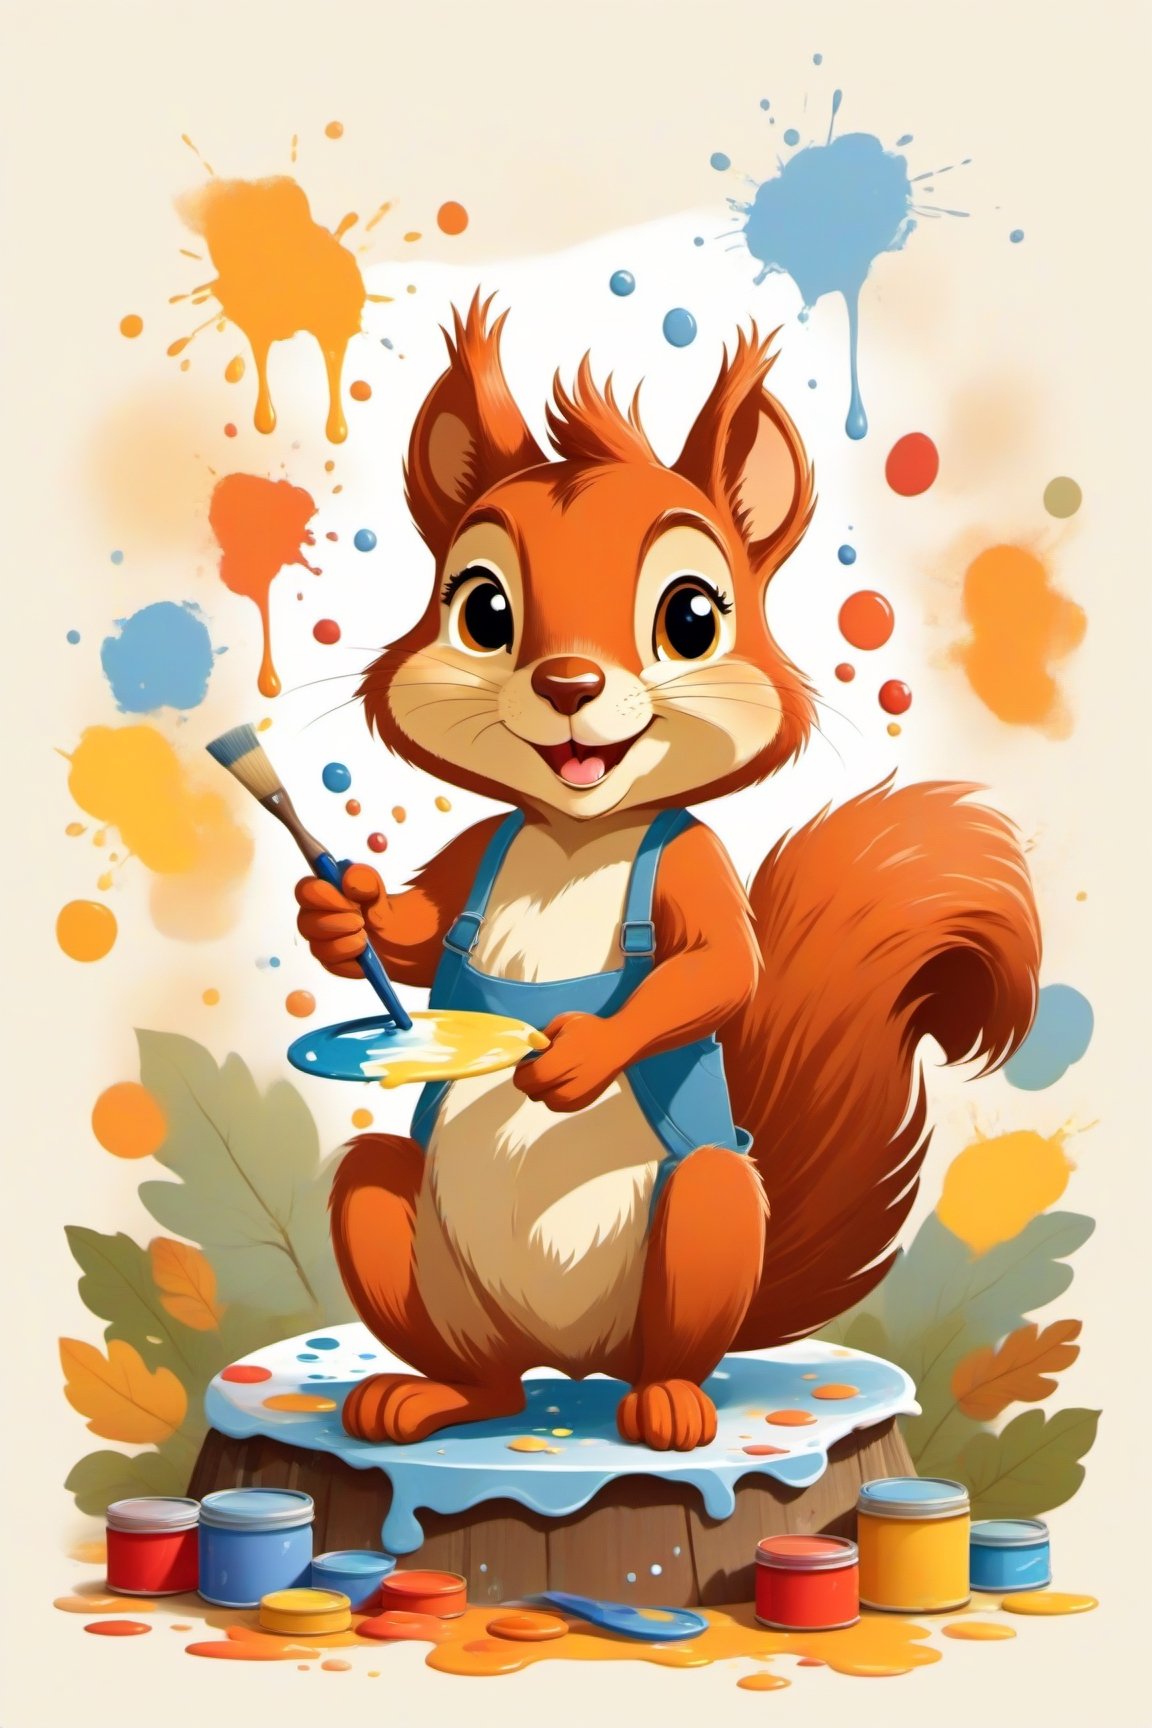 Illustration of a charming scene with a cute squirrel splashing paints all over the cosy art studio. capture the squirrel's effusive happiness, looking at the camera. playful visual narrative. tshirt design